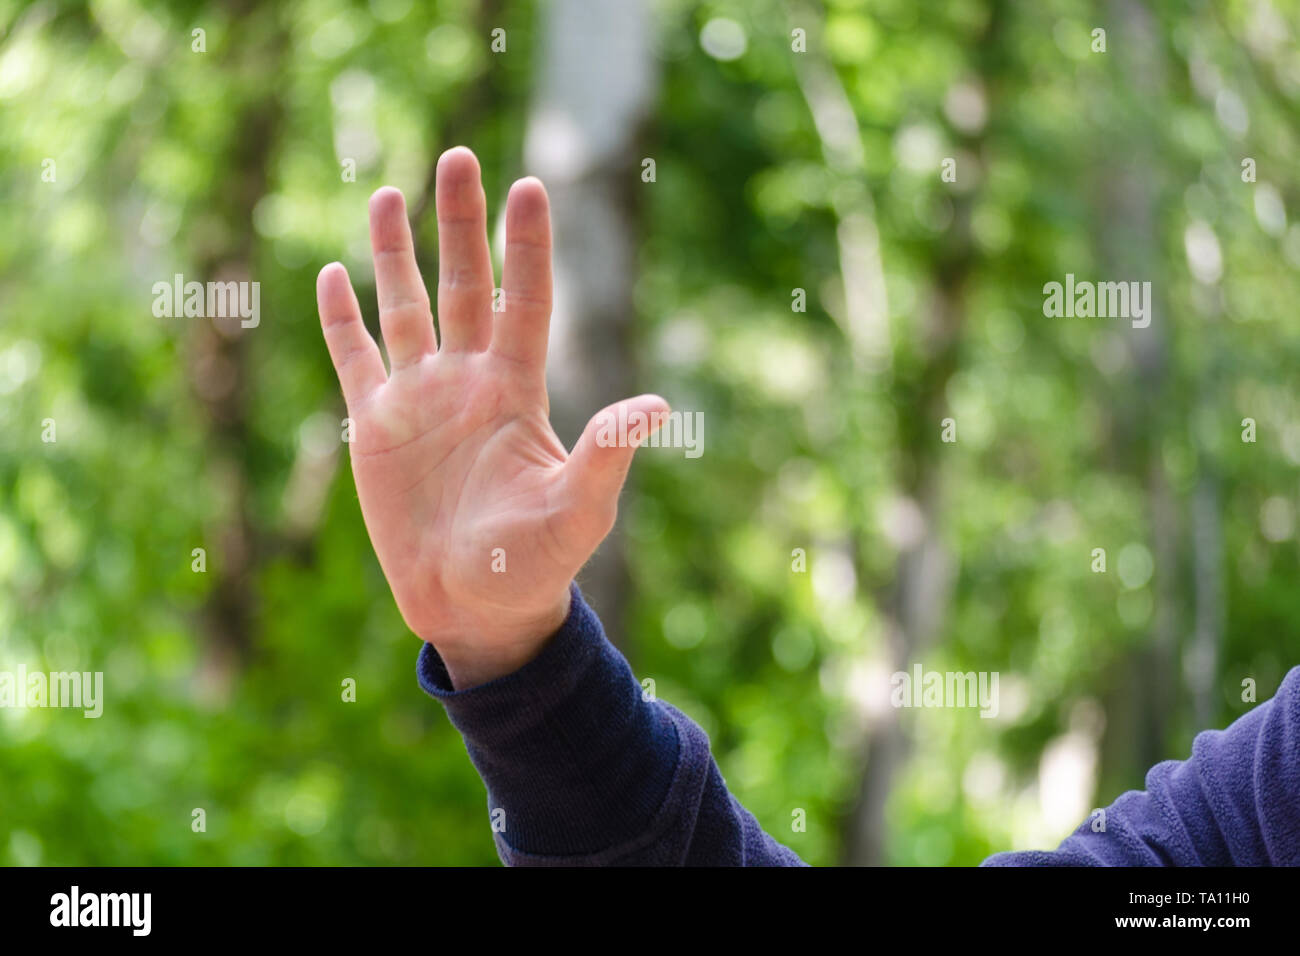 Open palm with spread fingers hand sign. Gesture mens hand of number or gives five. Concept of greeting, openness. Close Up view on green nature backg Stock Photo